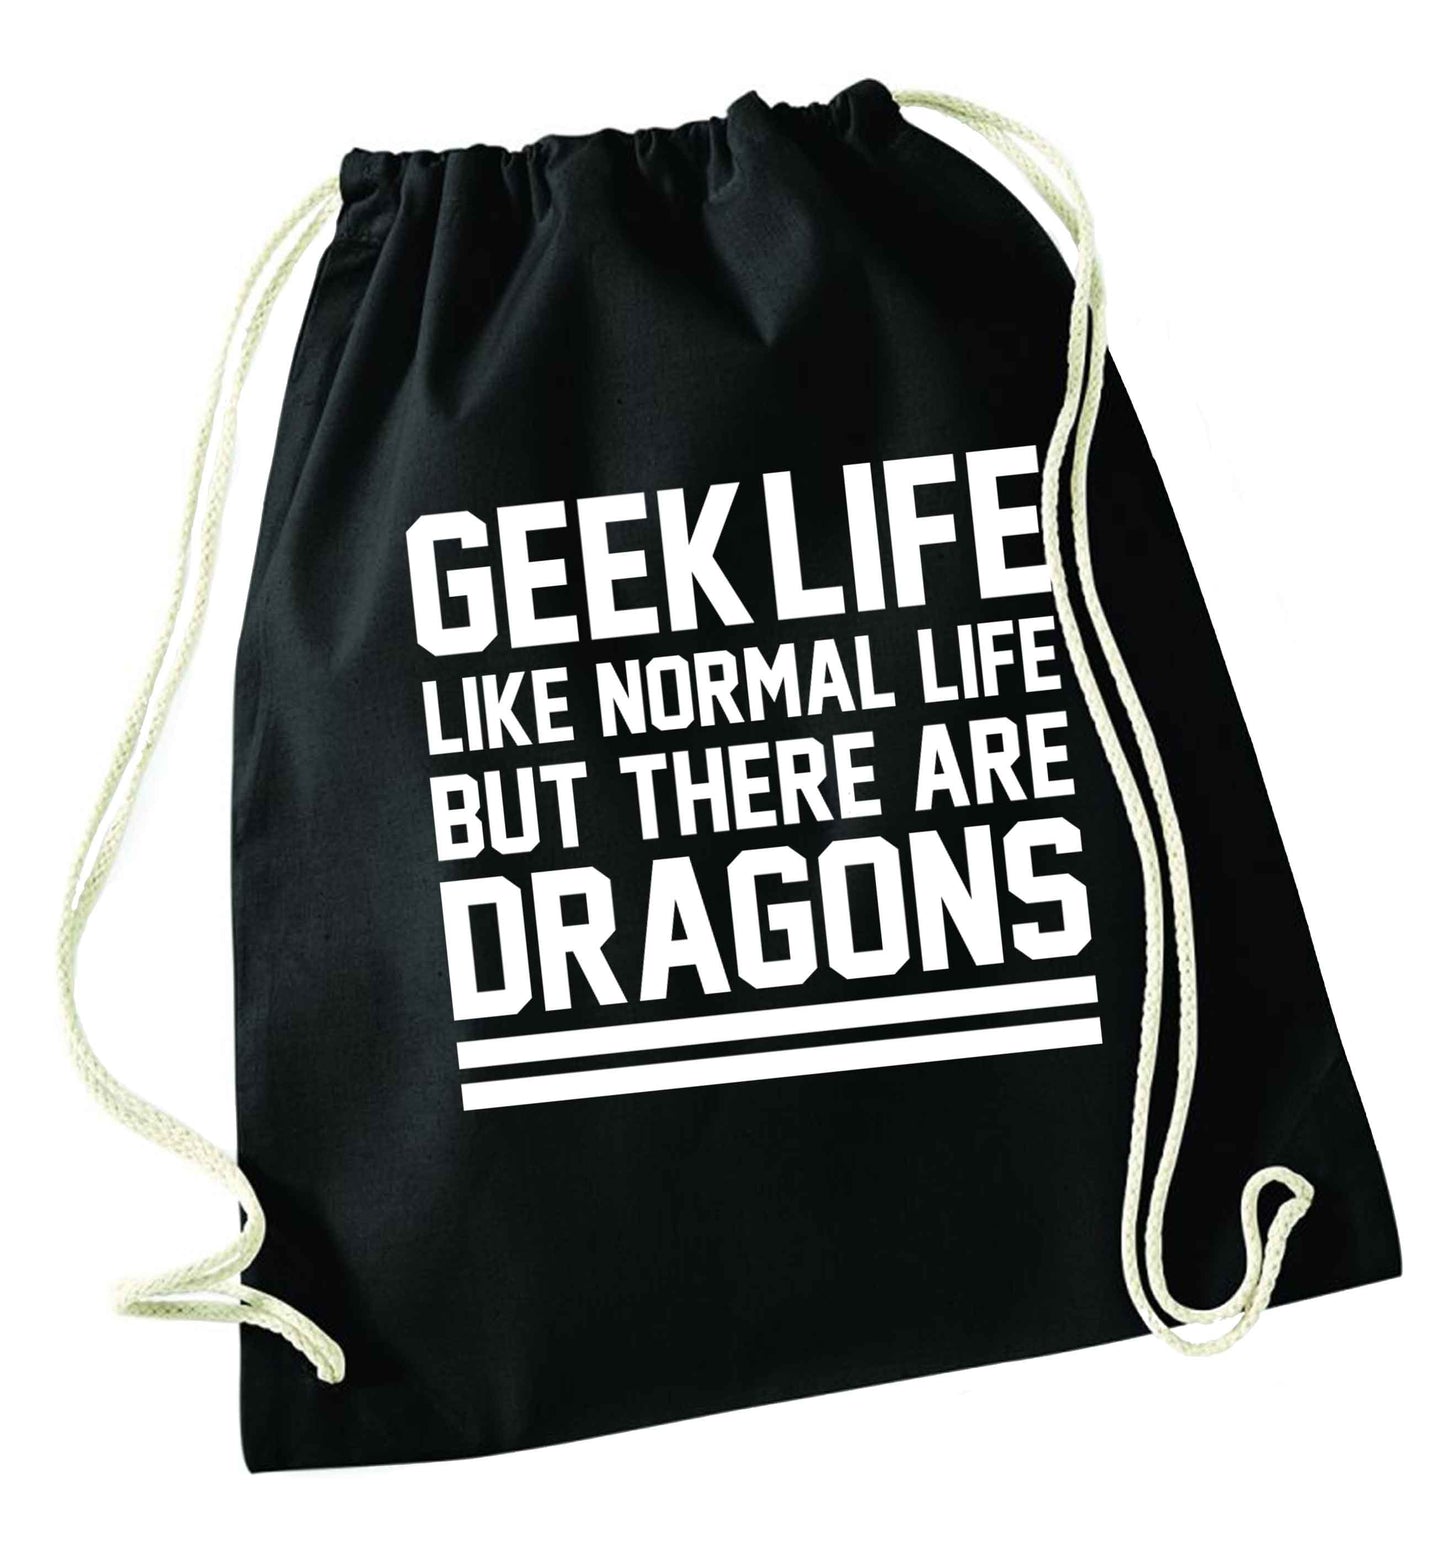 Geek life like normal life but there are dragons black drawstring bag